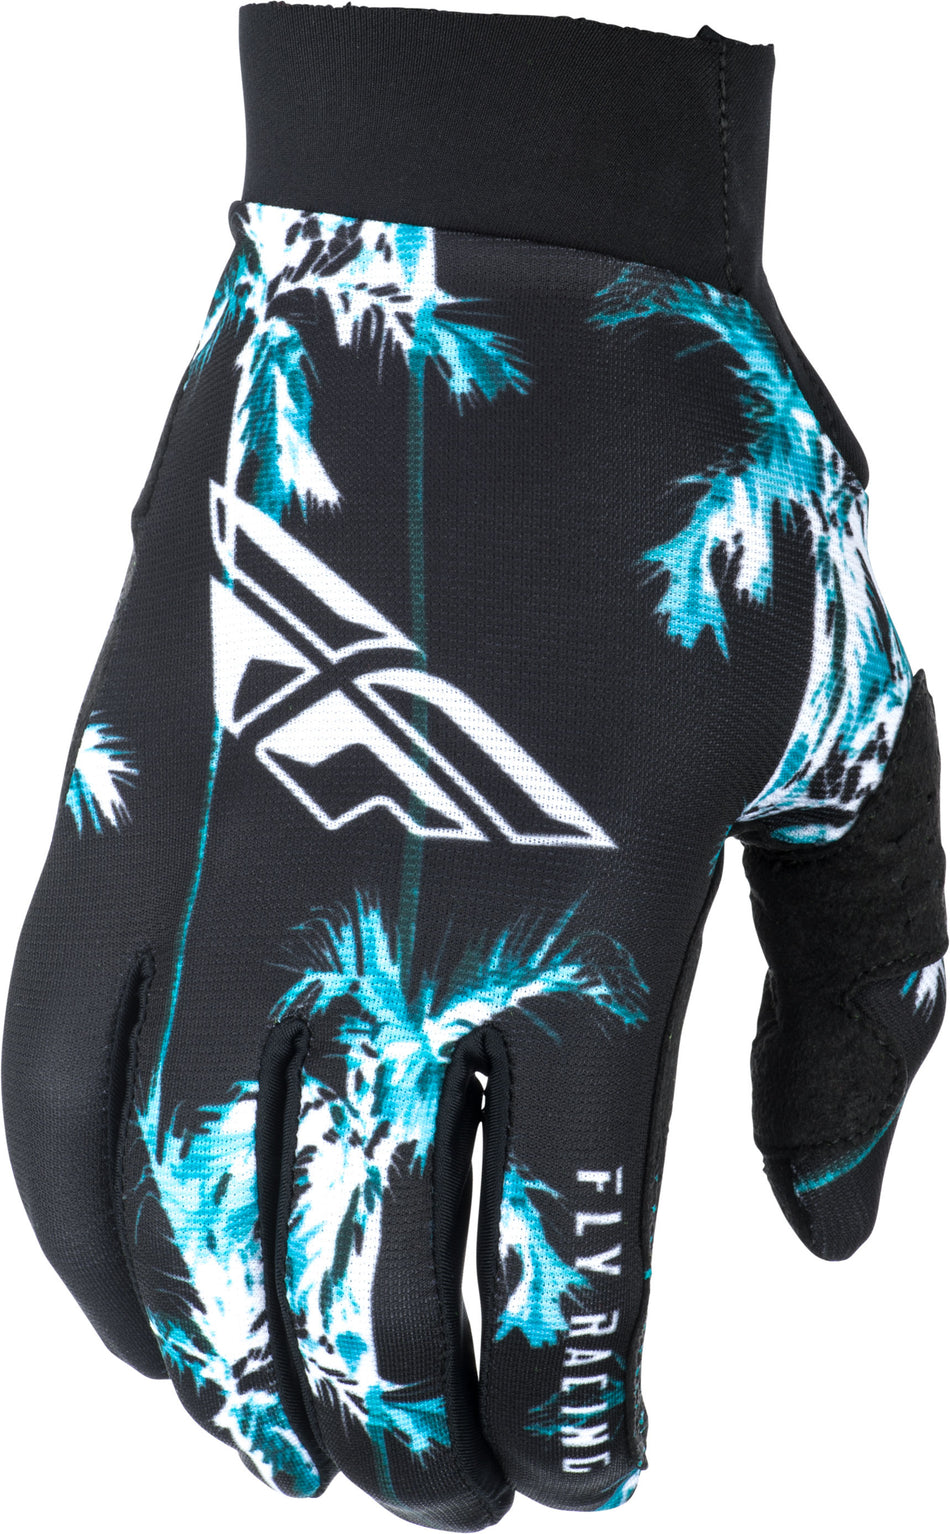 FLY RACING Pro Lite Paradise Gloves Teal/Black Sz 13 372-81913